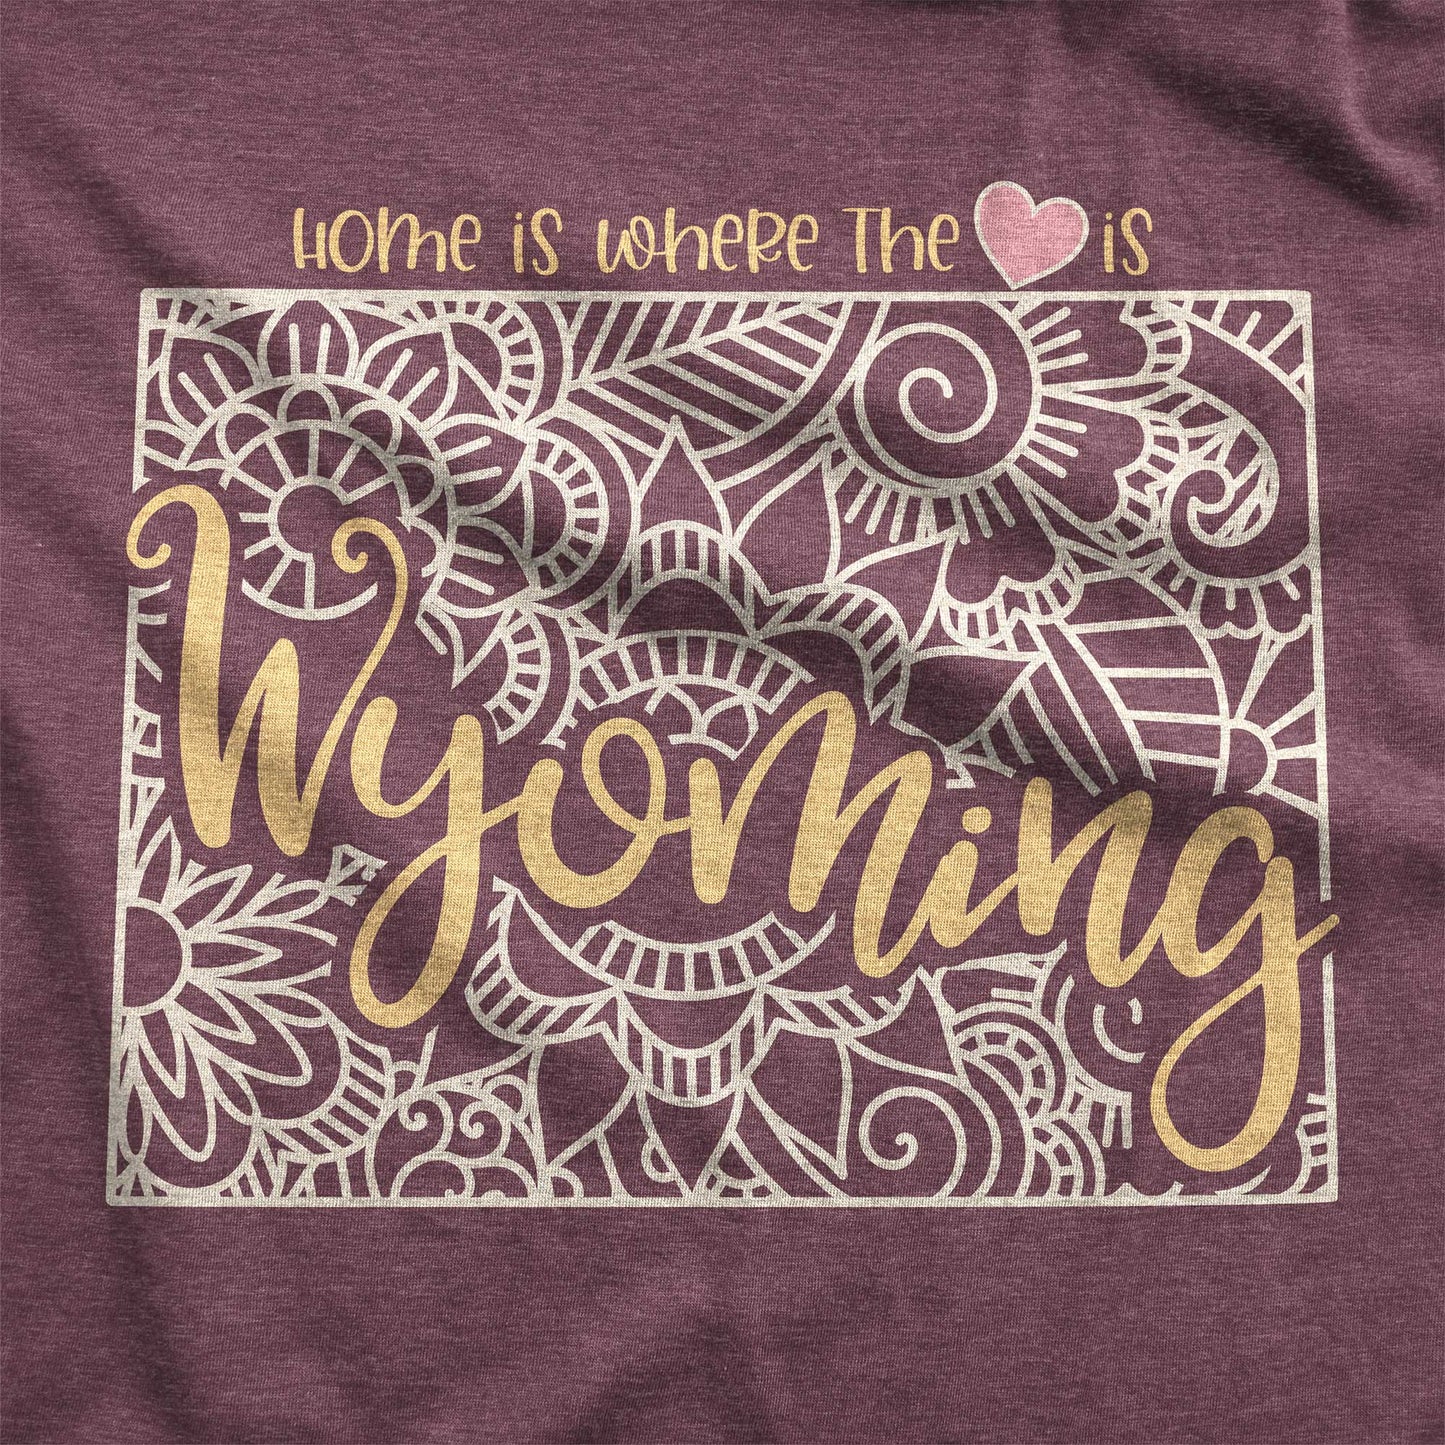 A heather maroon Bella Canvas swatch featuring a mandala in the shape of Wyoming with the words home is where the heart is.